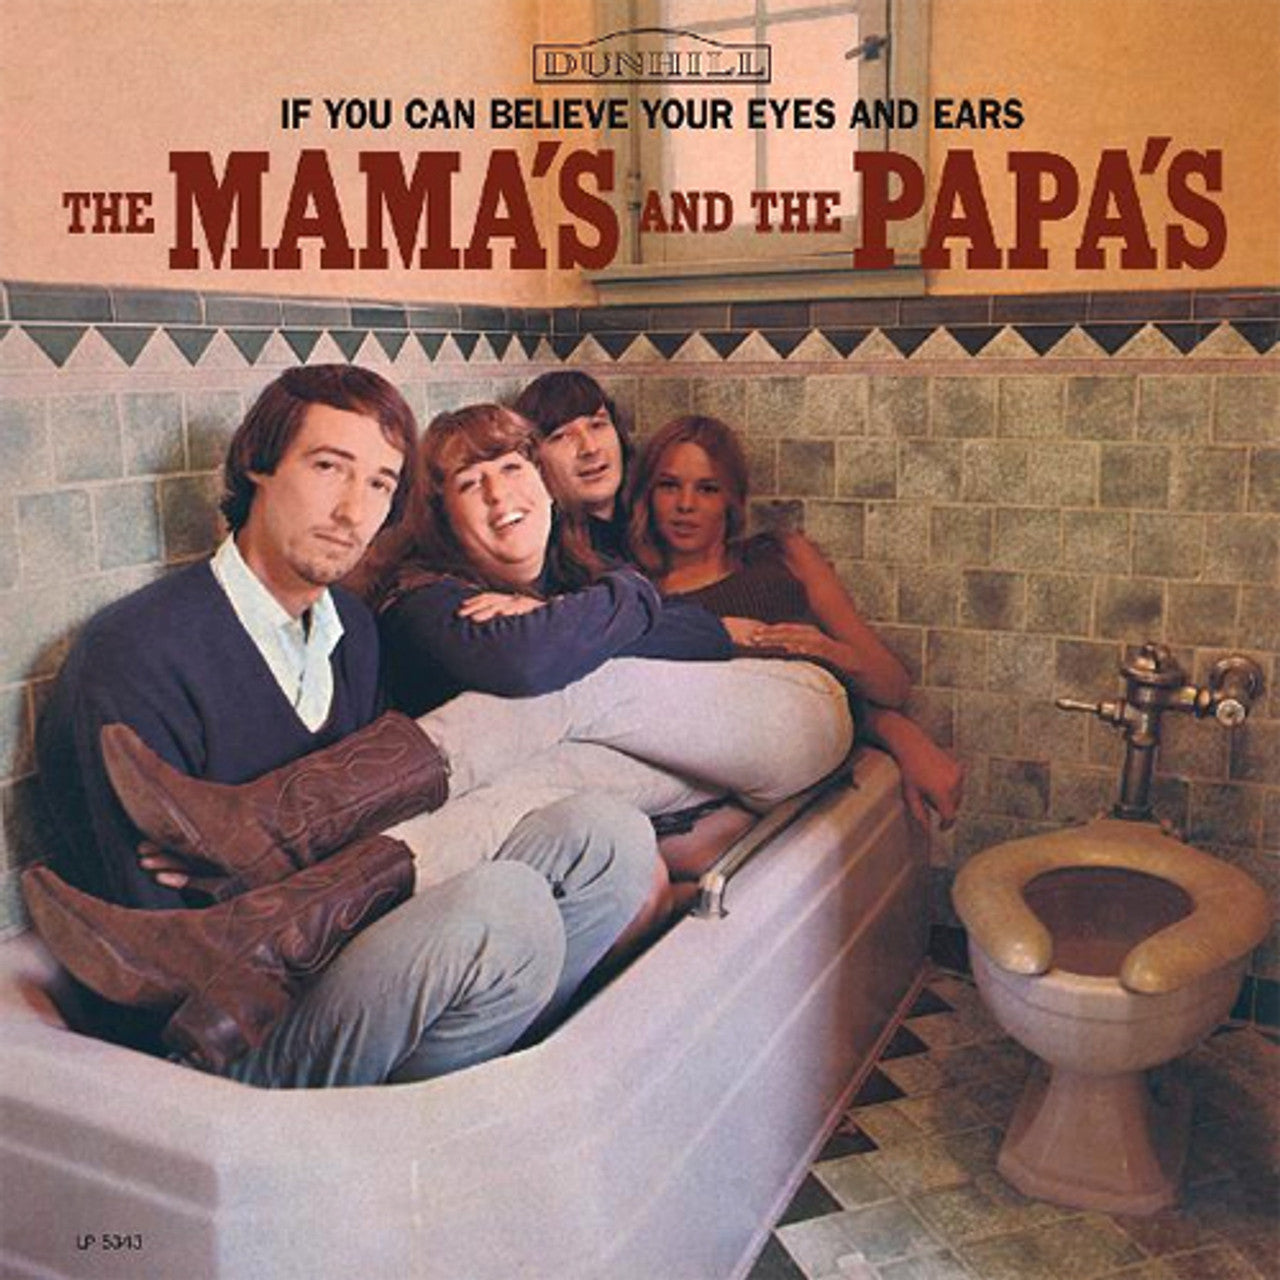 THE MAMAS & THE PAPAS - IF YOU CAN BELIEVE YOUR EYES AND EARS - VINYL LP